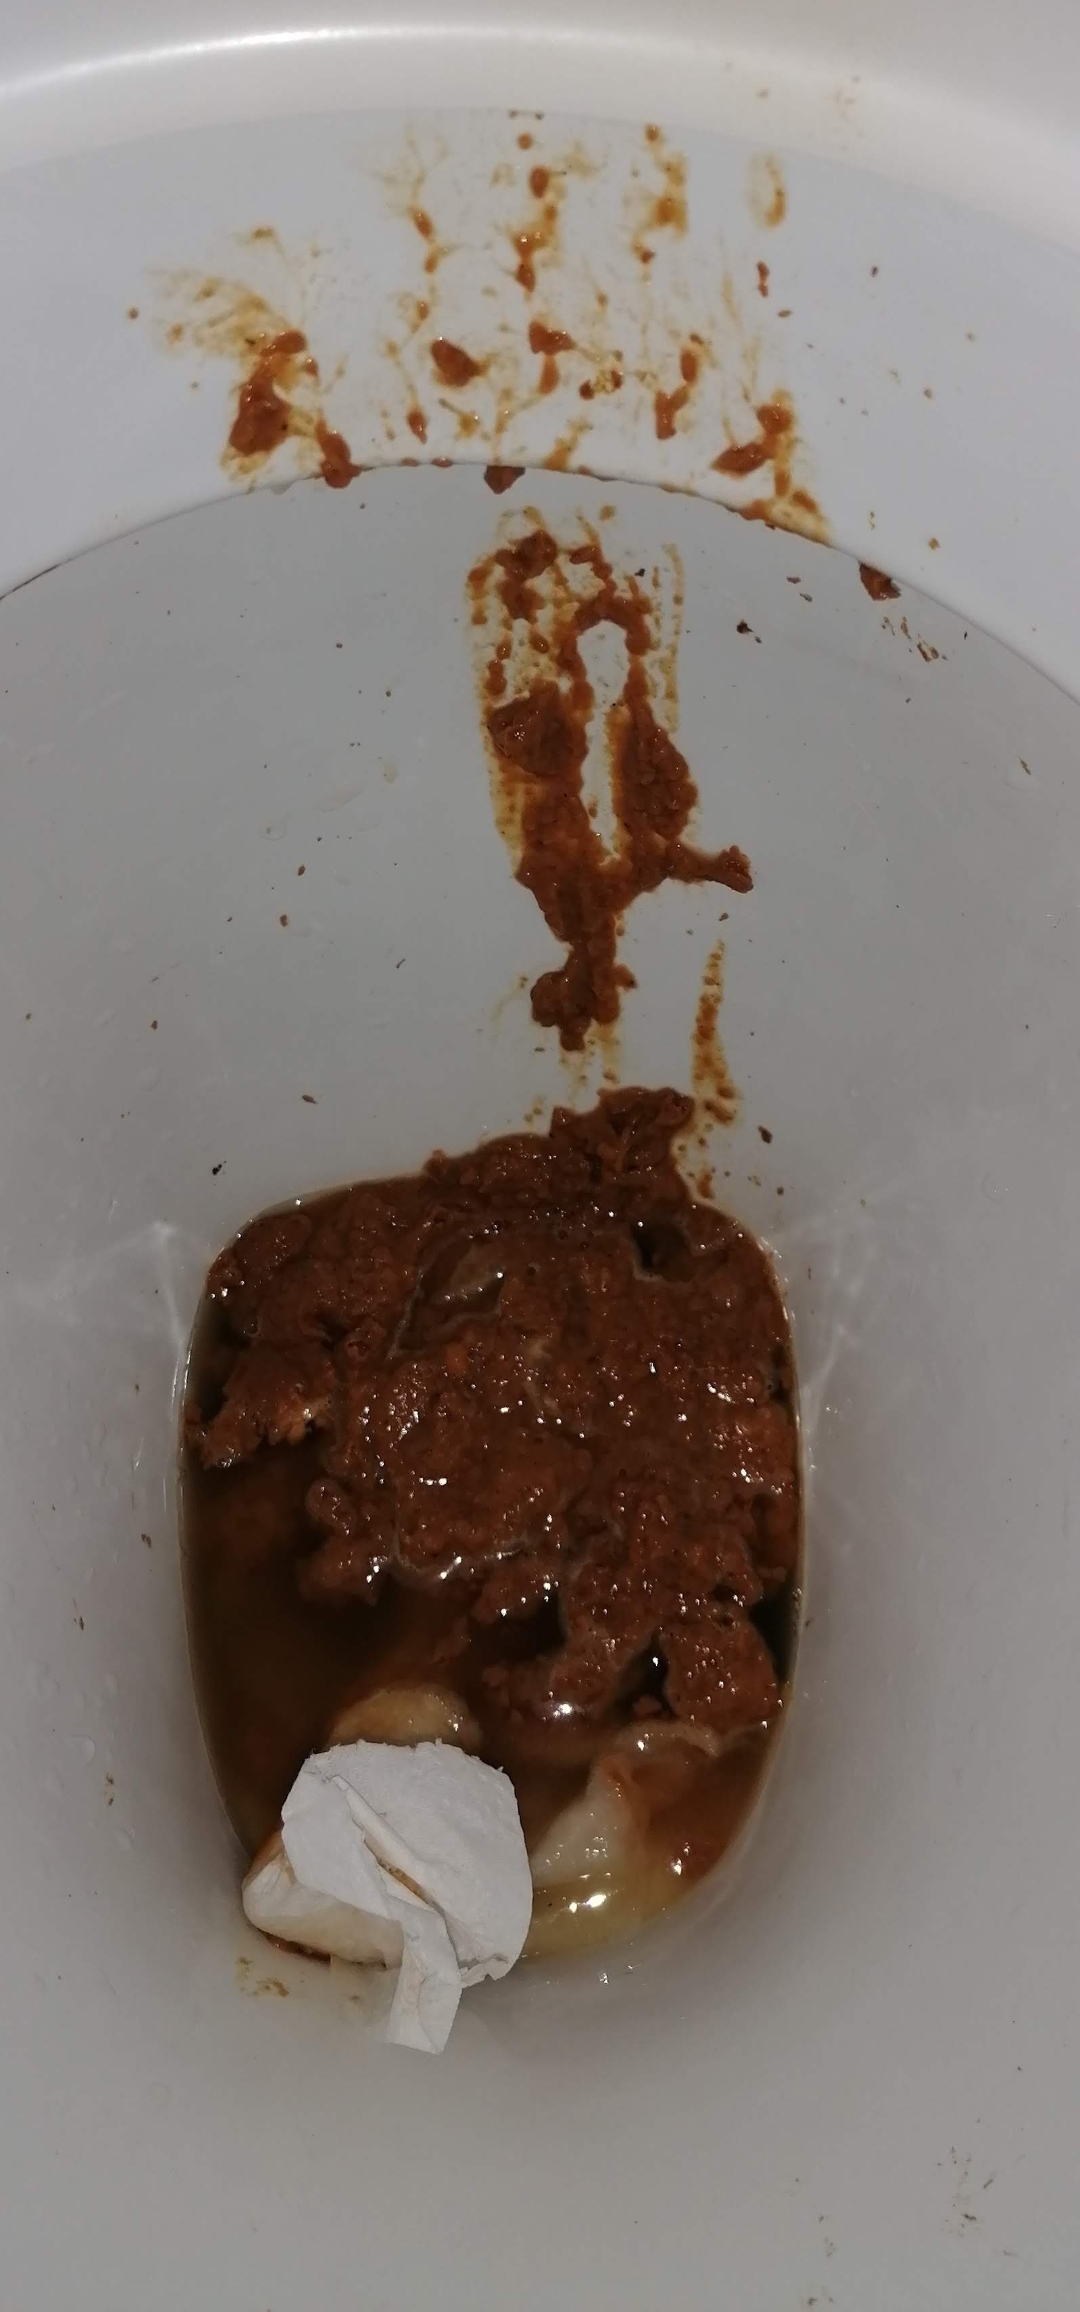 Very sloppy bubbling stomach shit on my mates loo this morning